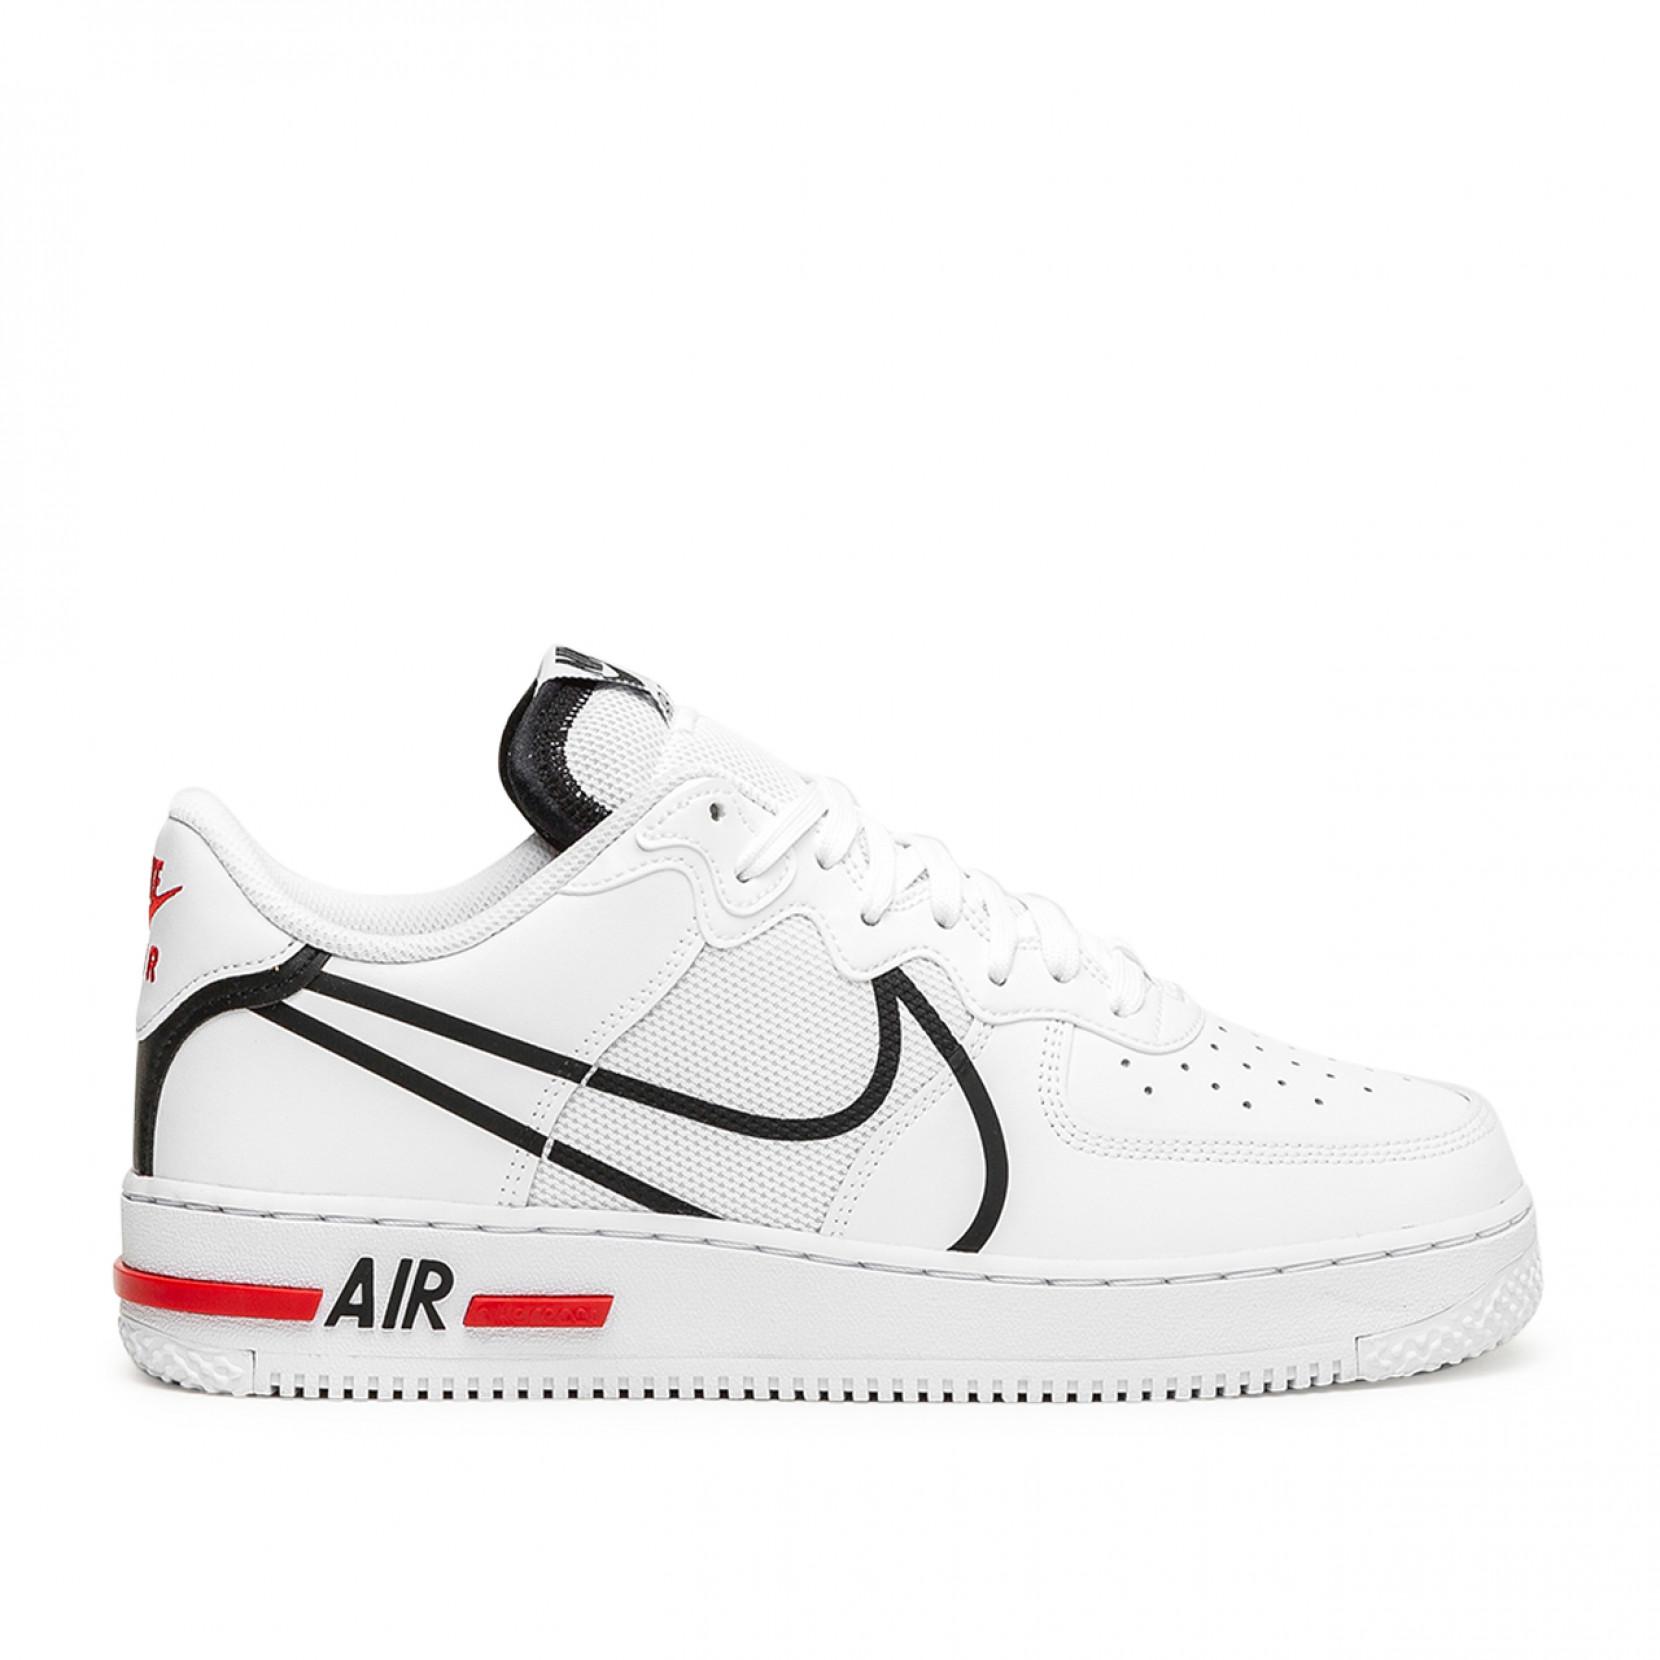 Nike Air Force 1 React Shoe in White/Black (White) for Men - Lyst